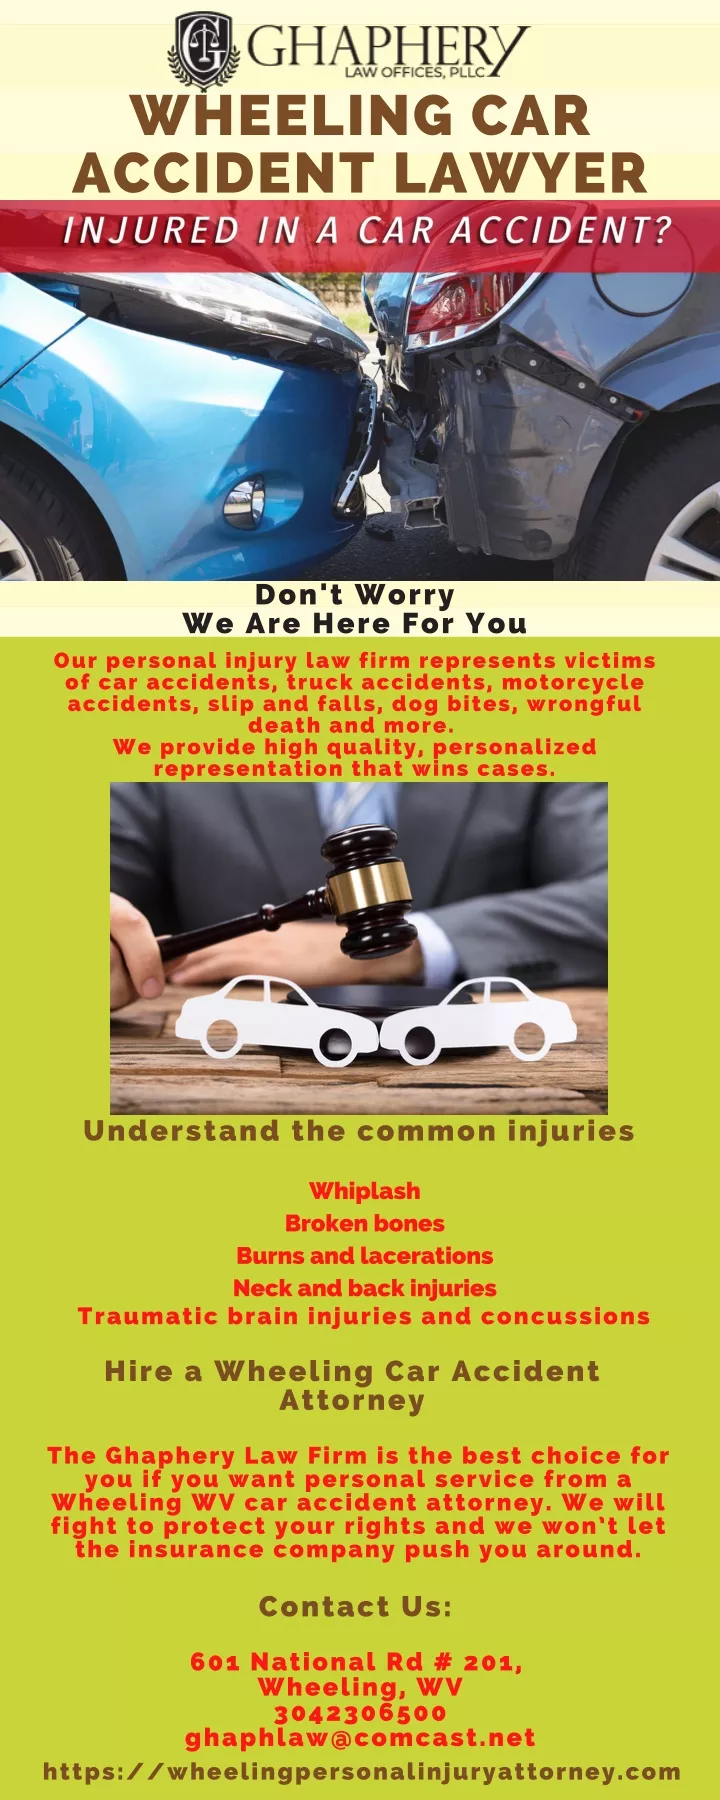 wheeling car accident lawyer